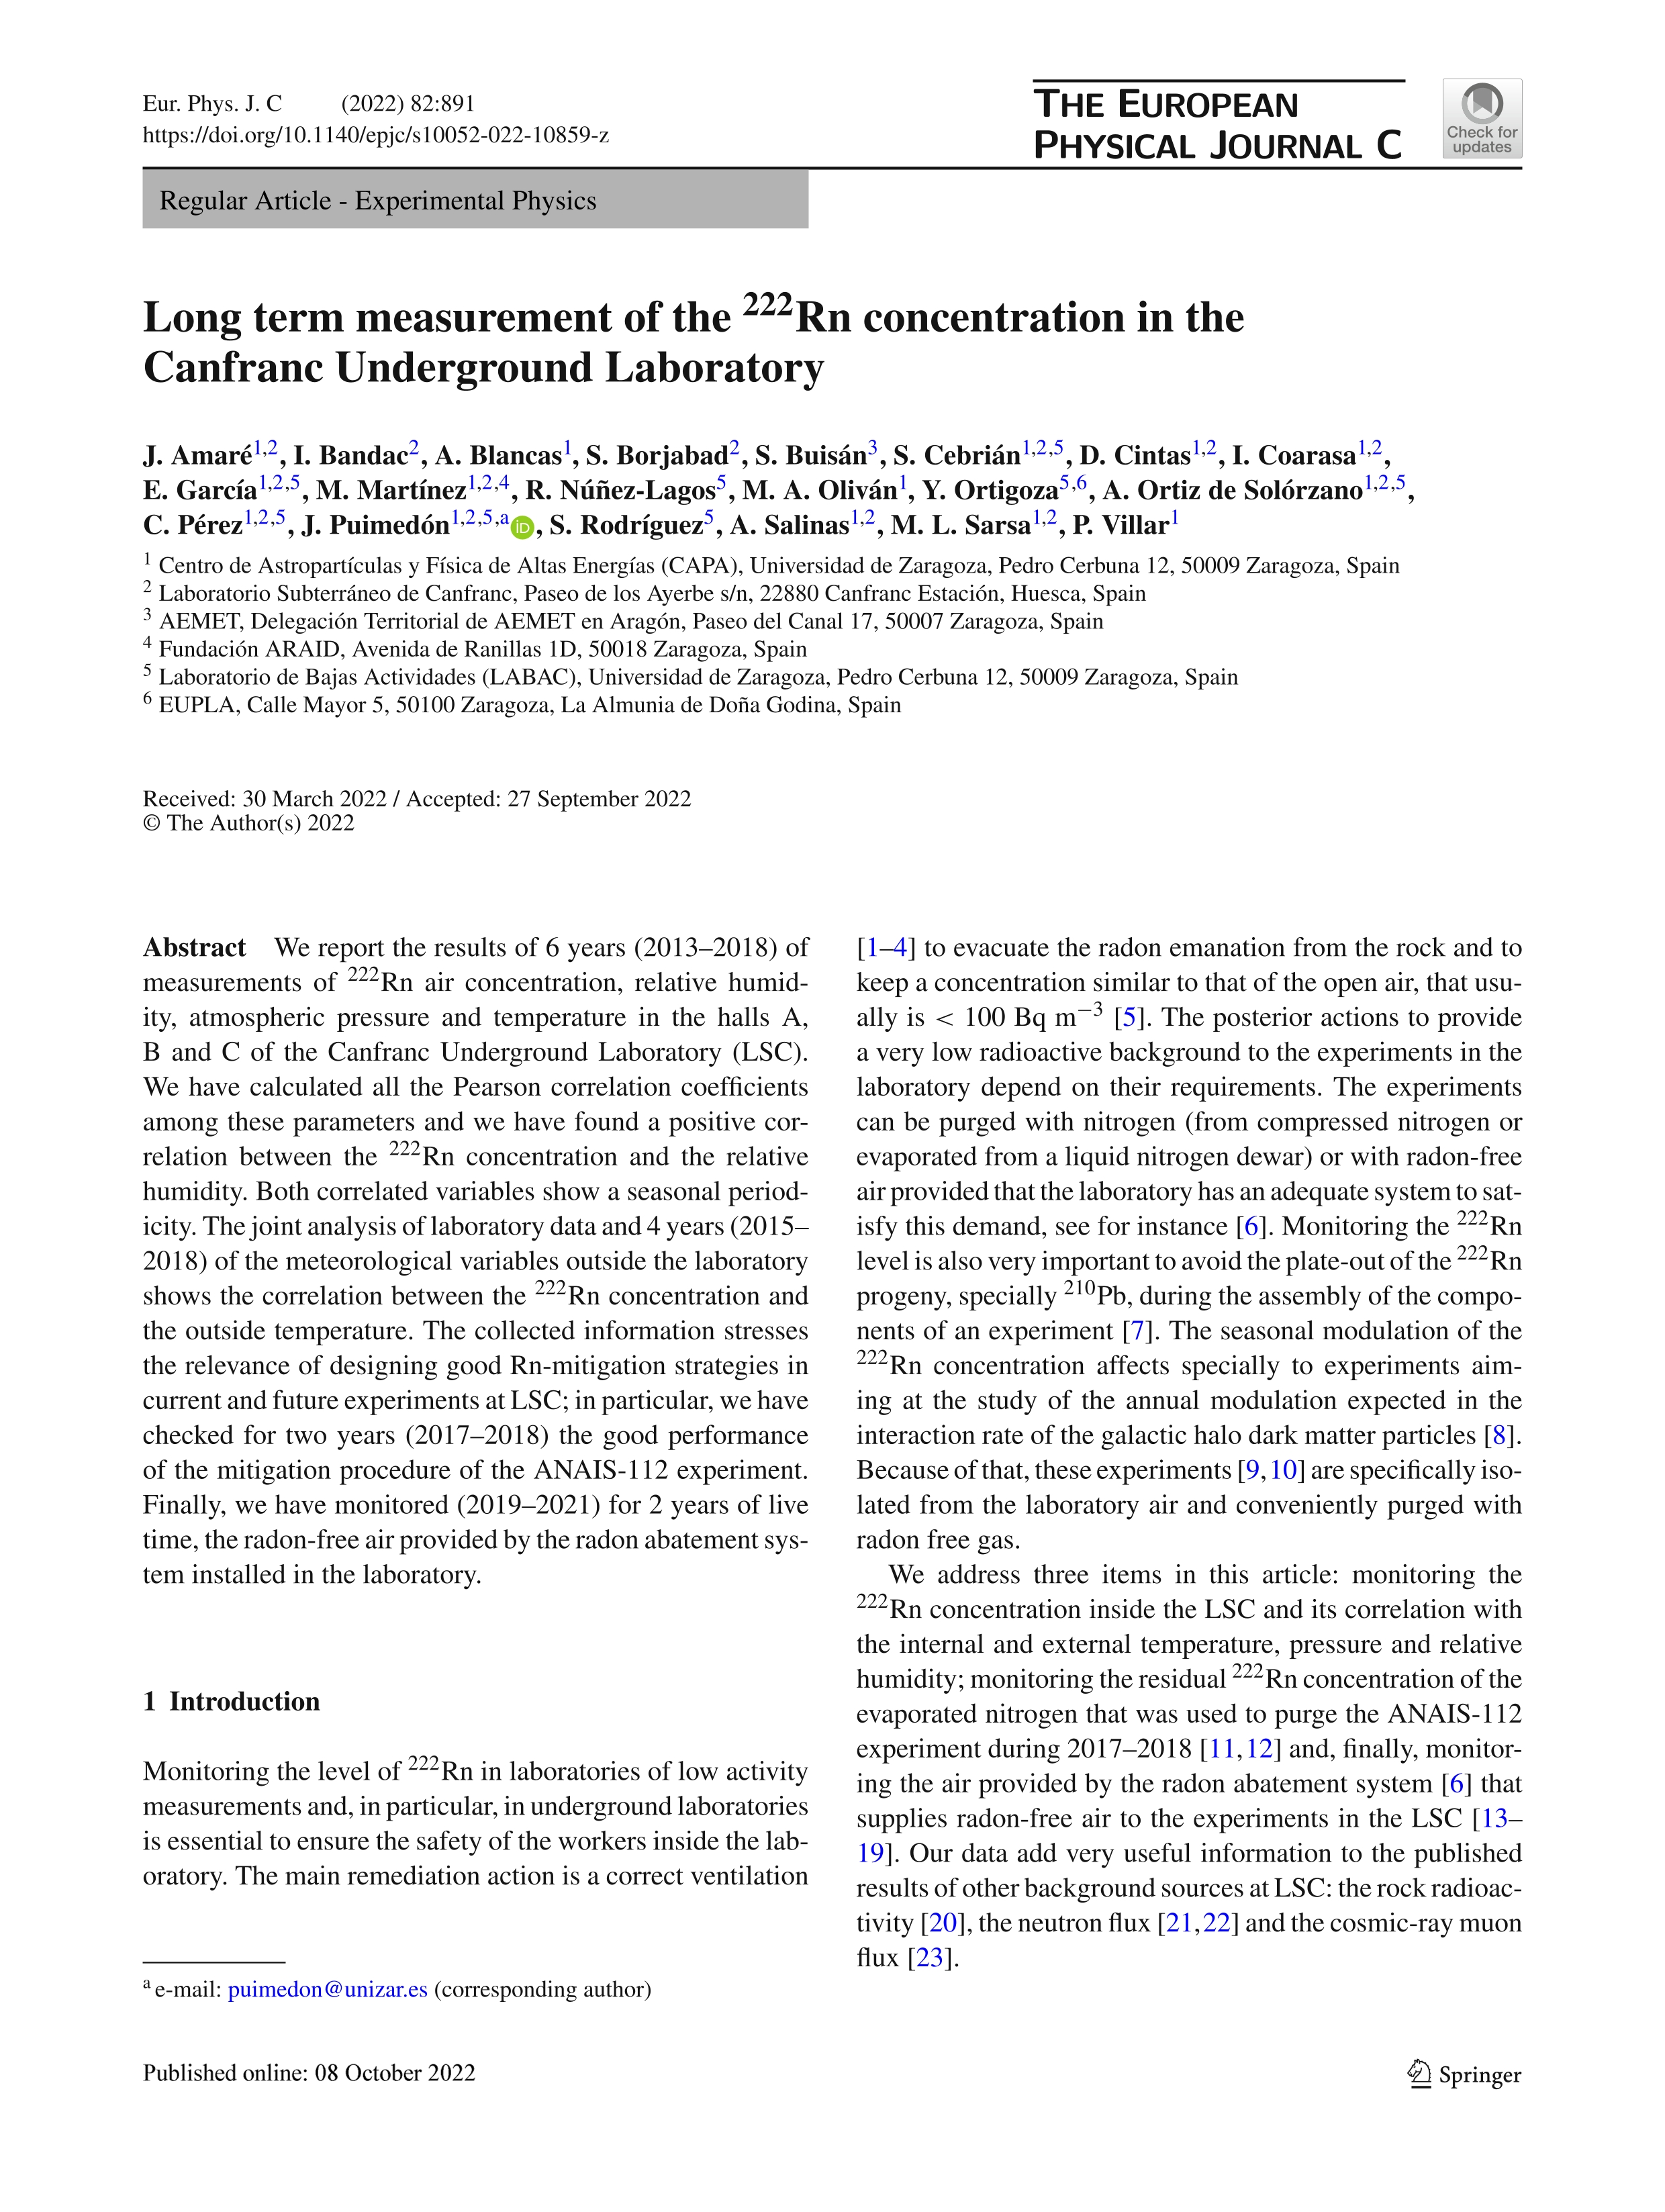 Long term measurement of the 222Rn concentration in the Canfranc Underground Laboratory